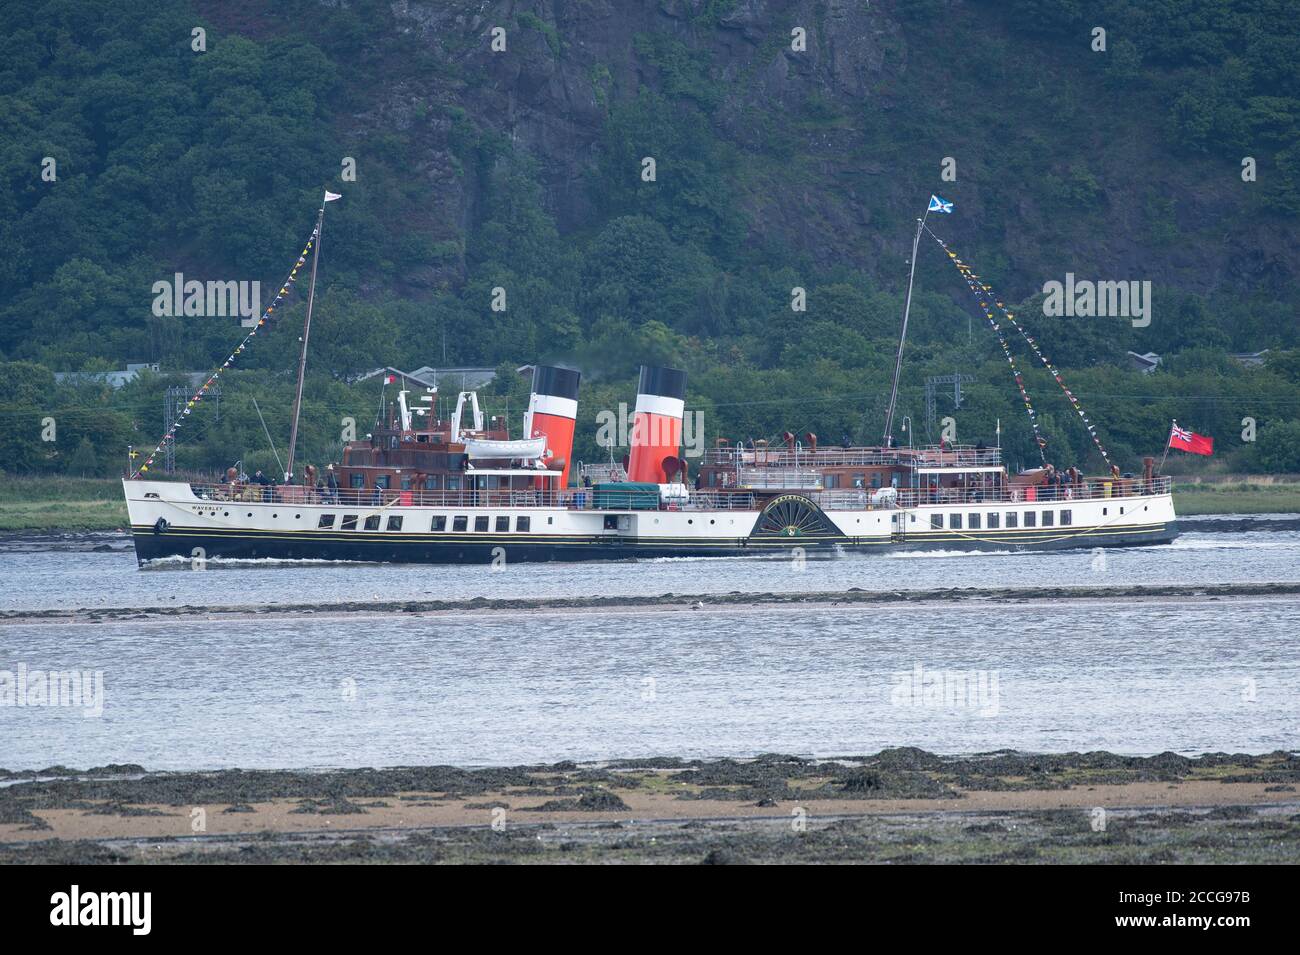 Langbank, Scotland, UK. 22nd Aug, 2020. The world's oldest working paddle steamer The Waverley sails down the Clyde near Dumbarton with its first paying passengers, making her triumphant return after being out of service for 22 month following her extensive boiler refit. Built over 70 years ago, the PS Waverley is the world's last sea-going paddle steamer. The Waverley will operate until Sunday 6th September on the Clyde. Credit: Antonio Brecht Grist/Alamy Live News Stock Photo